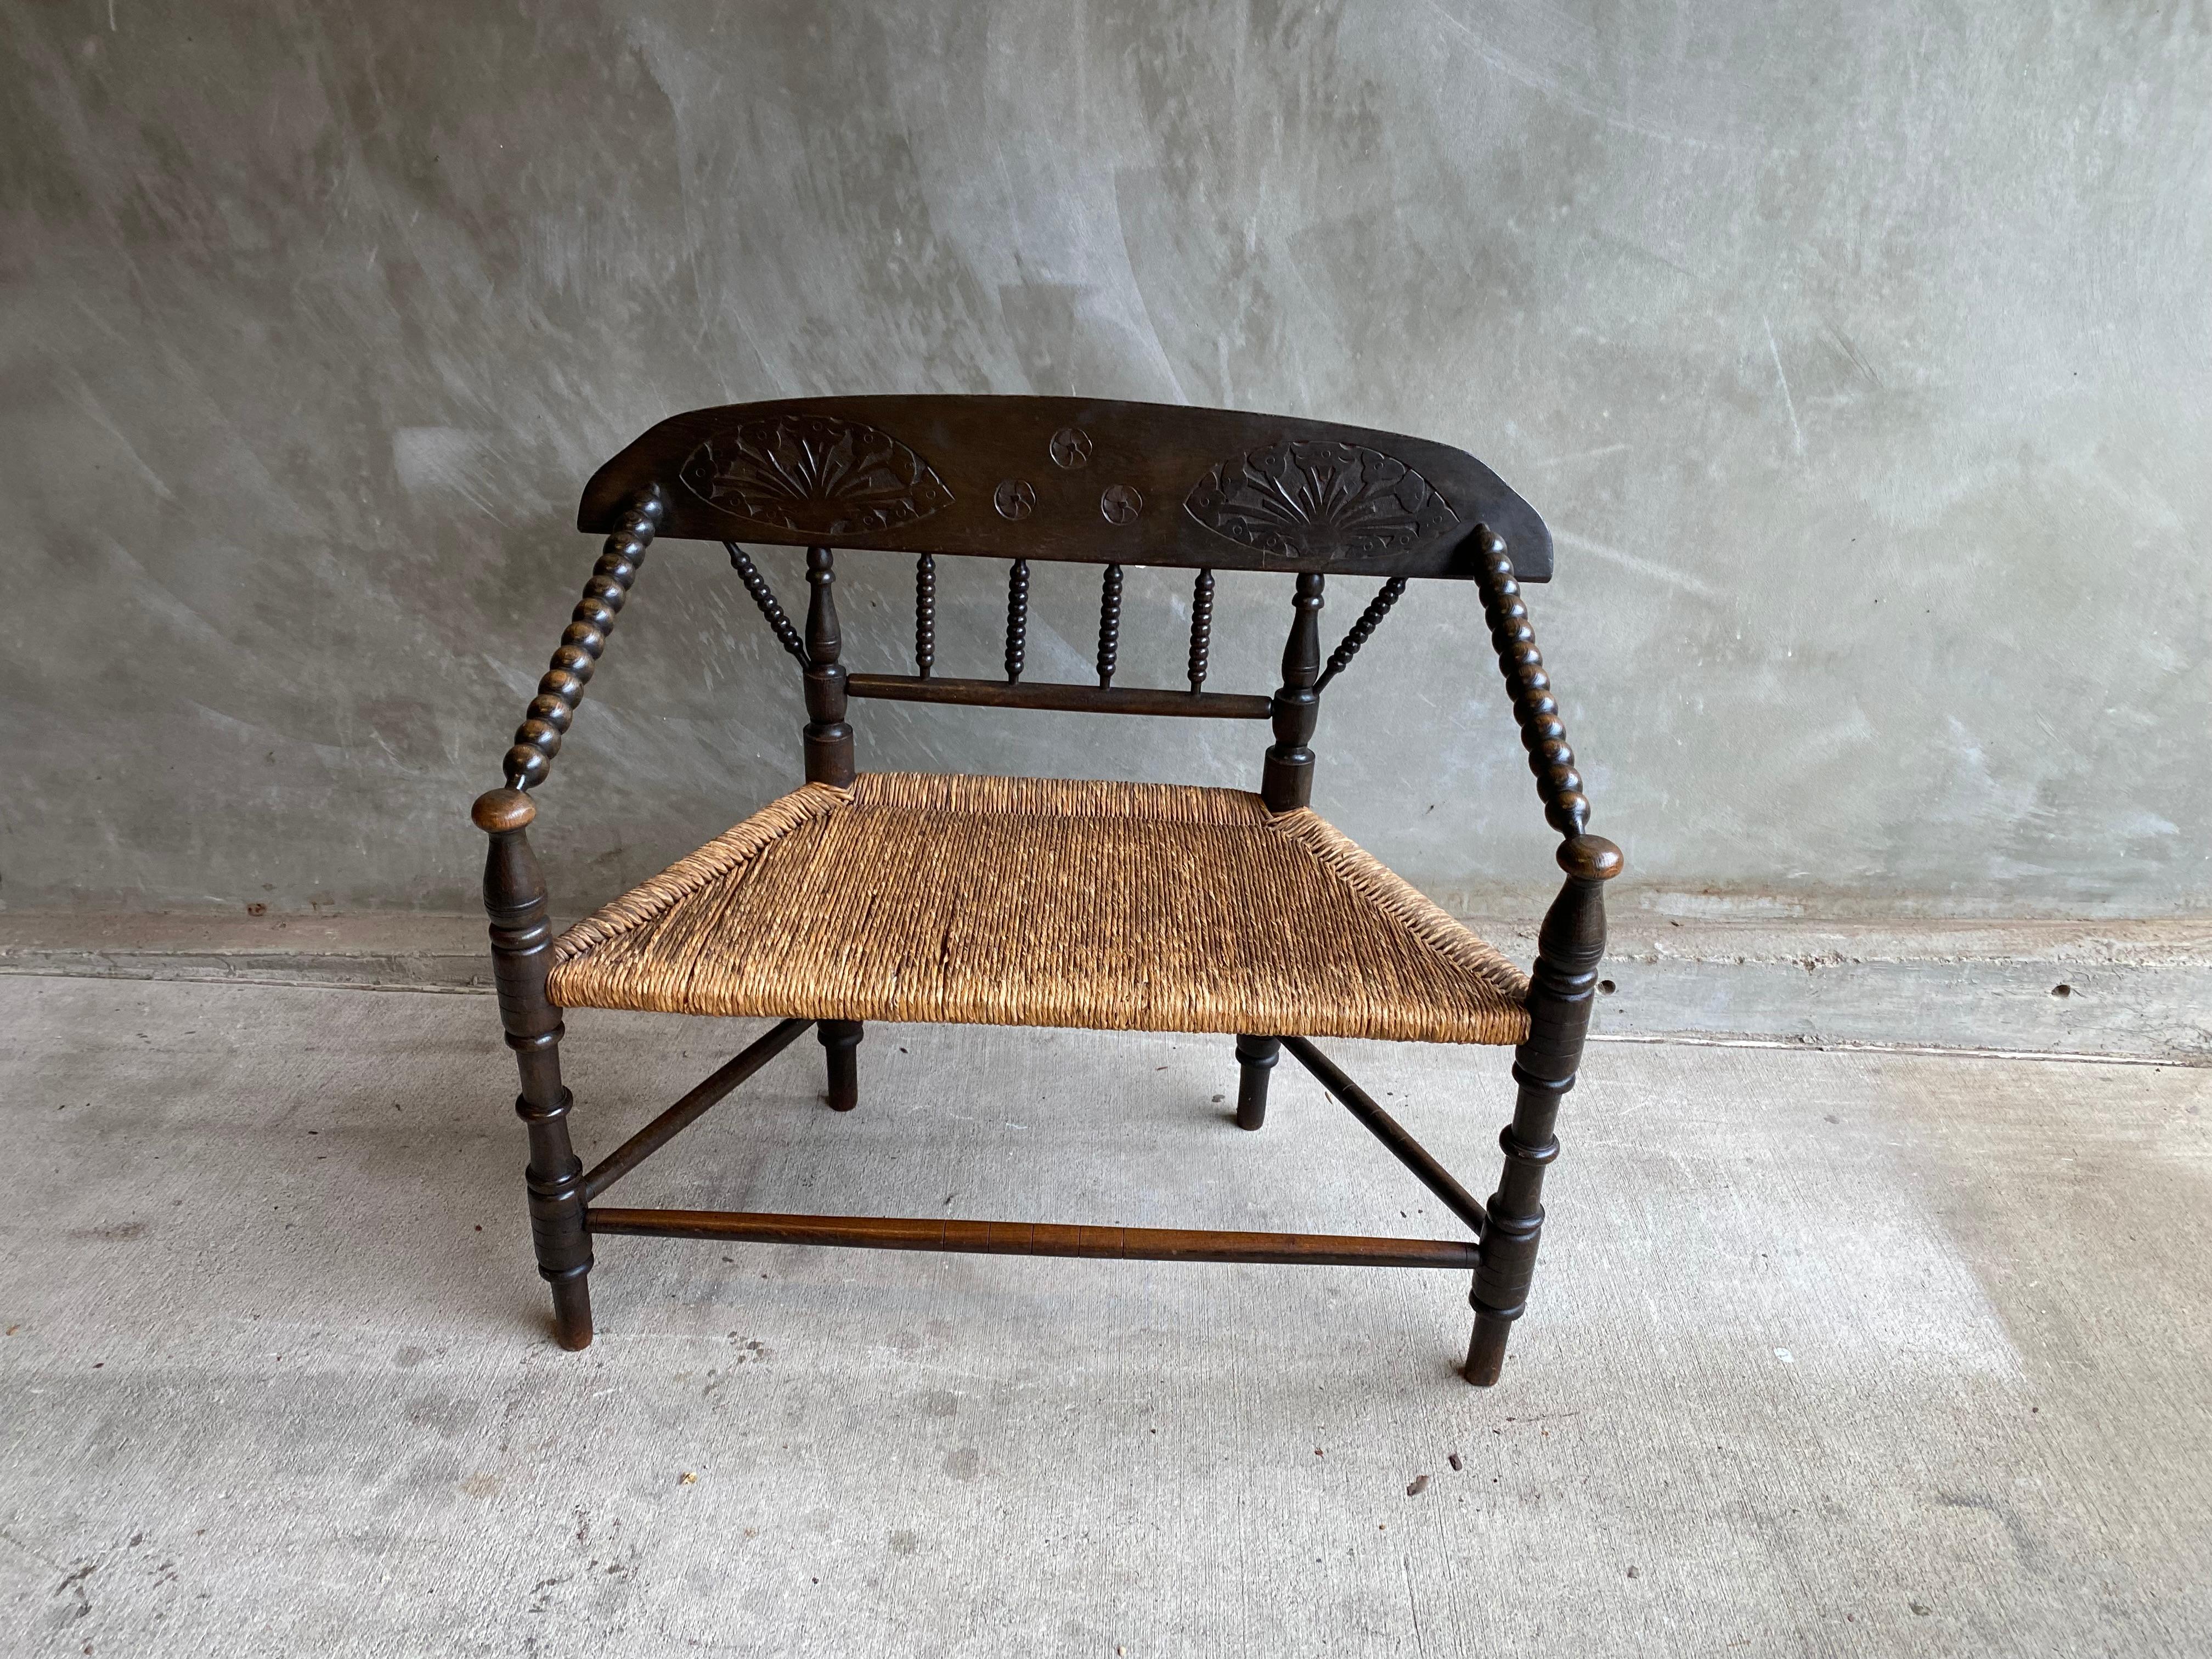 19th century settee in English bobbin style with rush seats and dark stain over oak. Matching pair of chairs sold separately. See listing LU1140228813522.